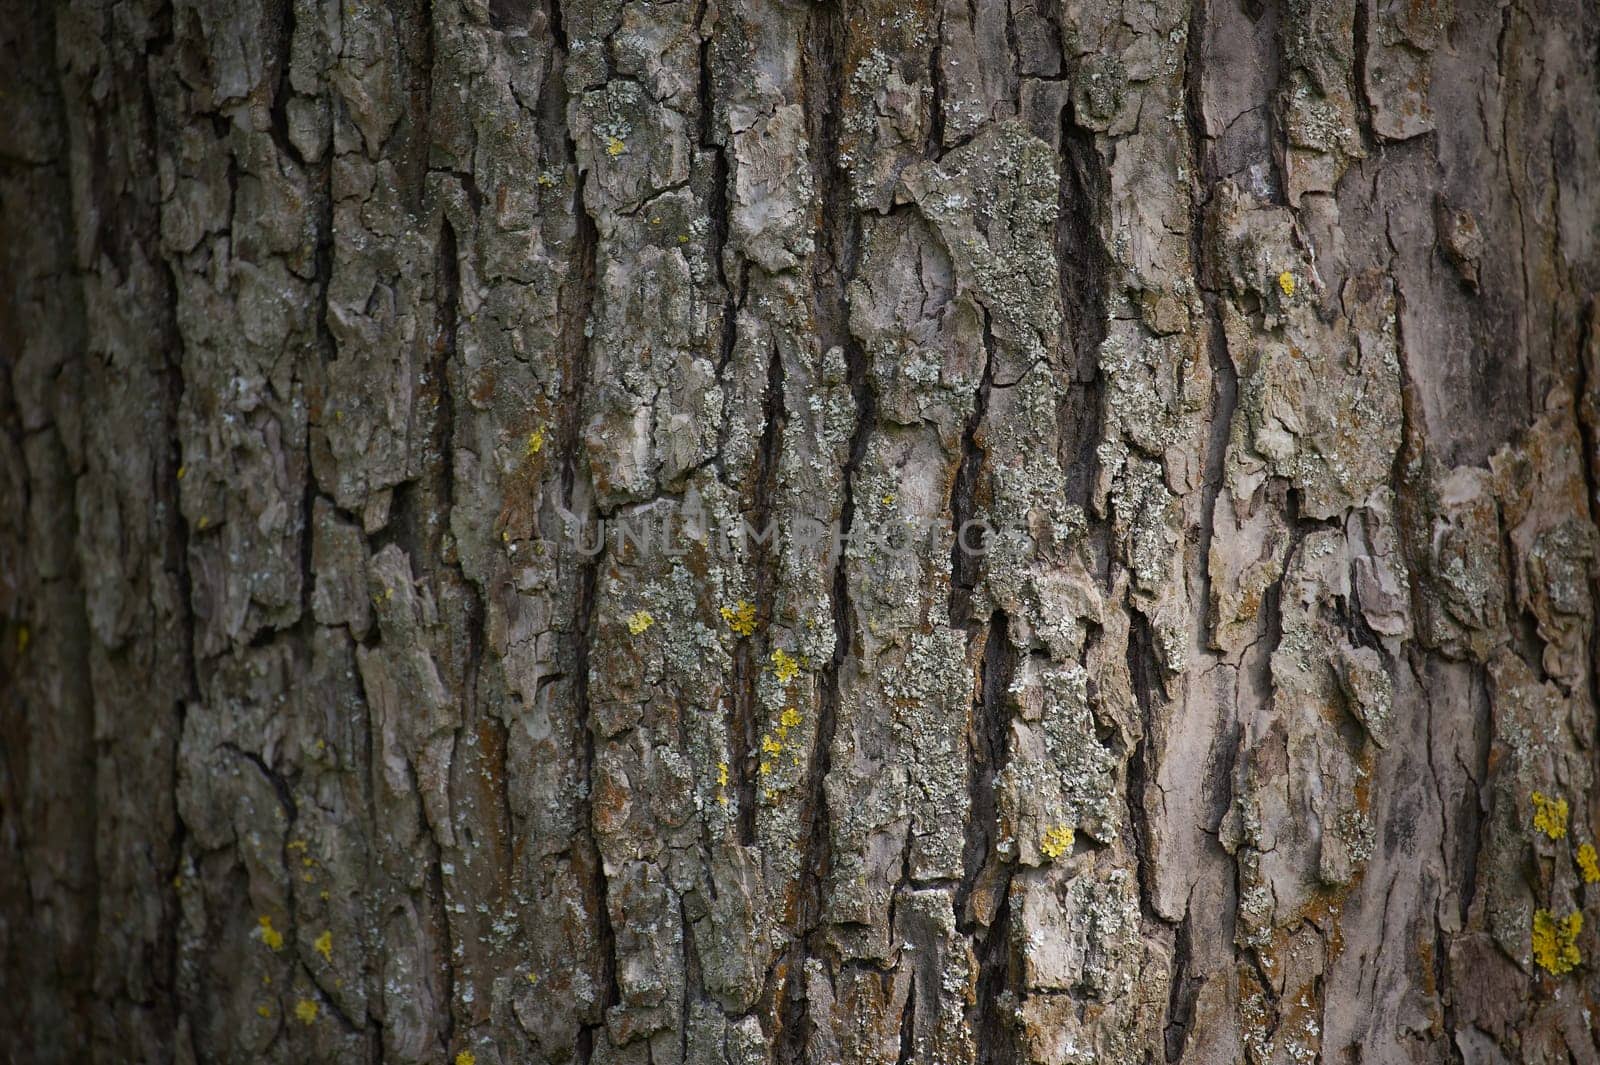 Close up view of the bark on a tree trunk fills the frame, with natural light illuminating its texture and details